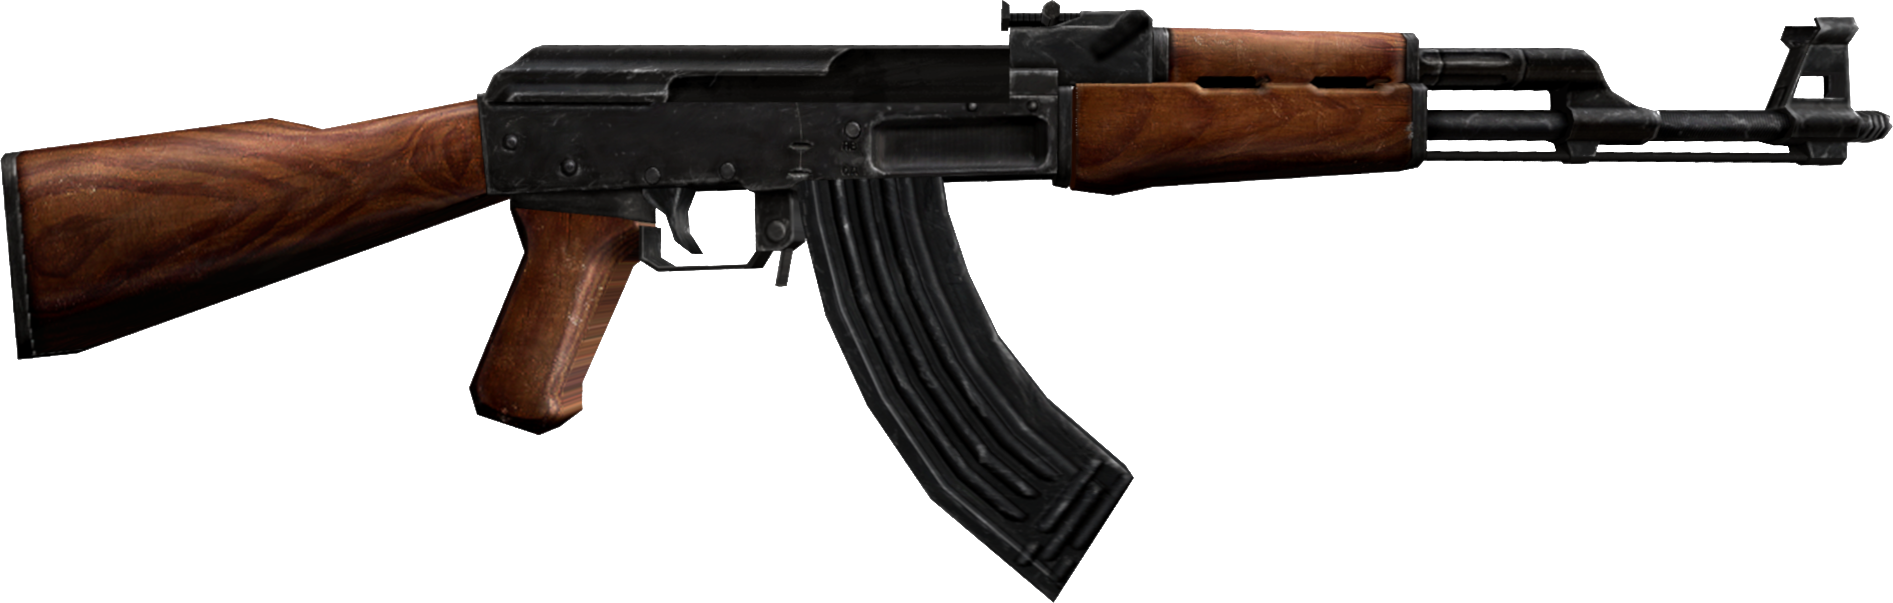 Download PNG image - Weapon PNG Transparent 